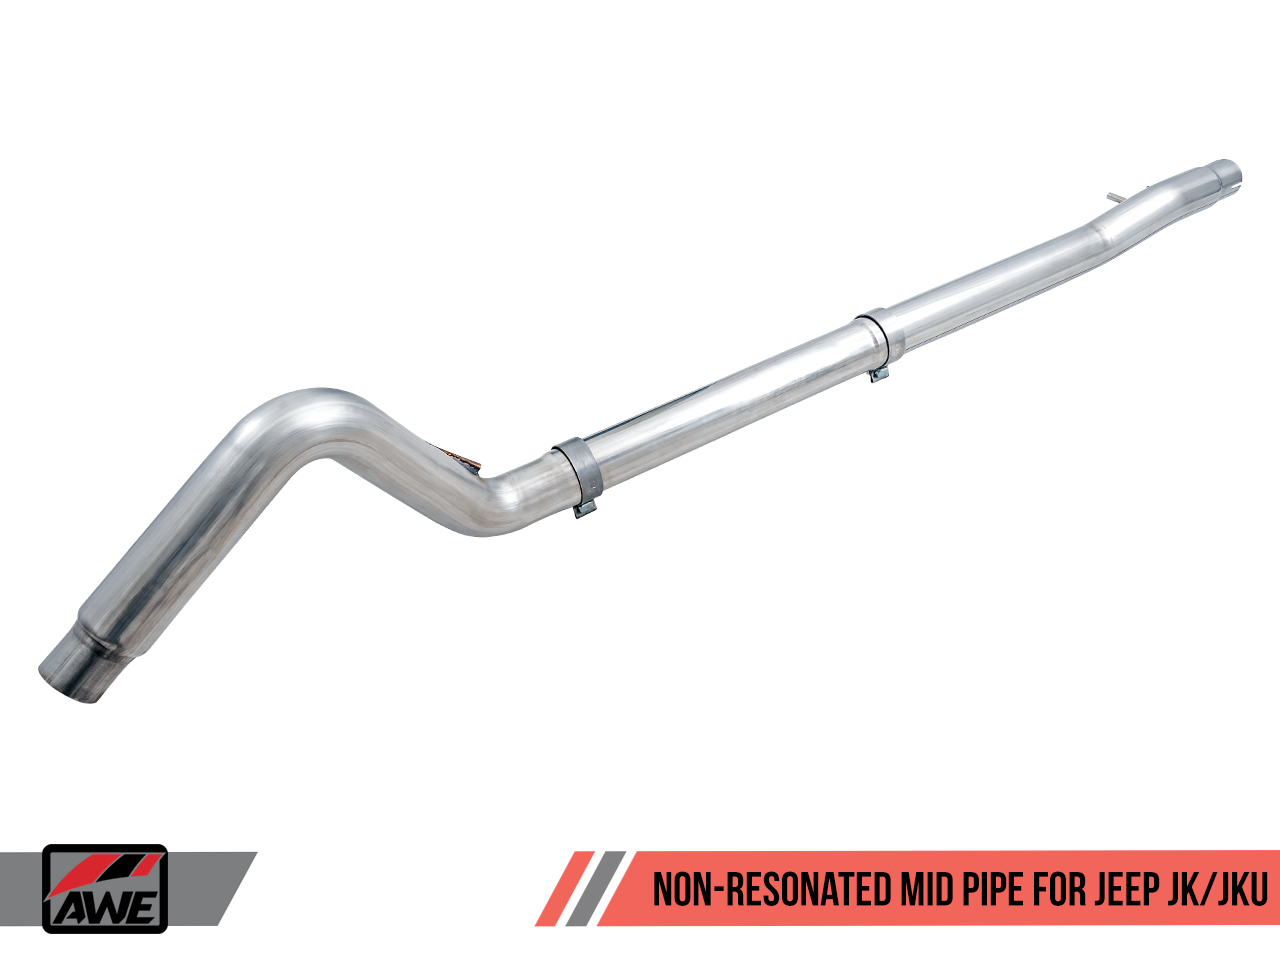 AWE Non-Resonated Mid Pipe for Jeep JK/JKU 3.6L (3020-11005)